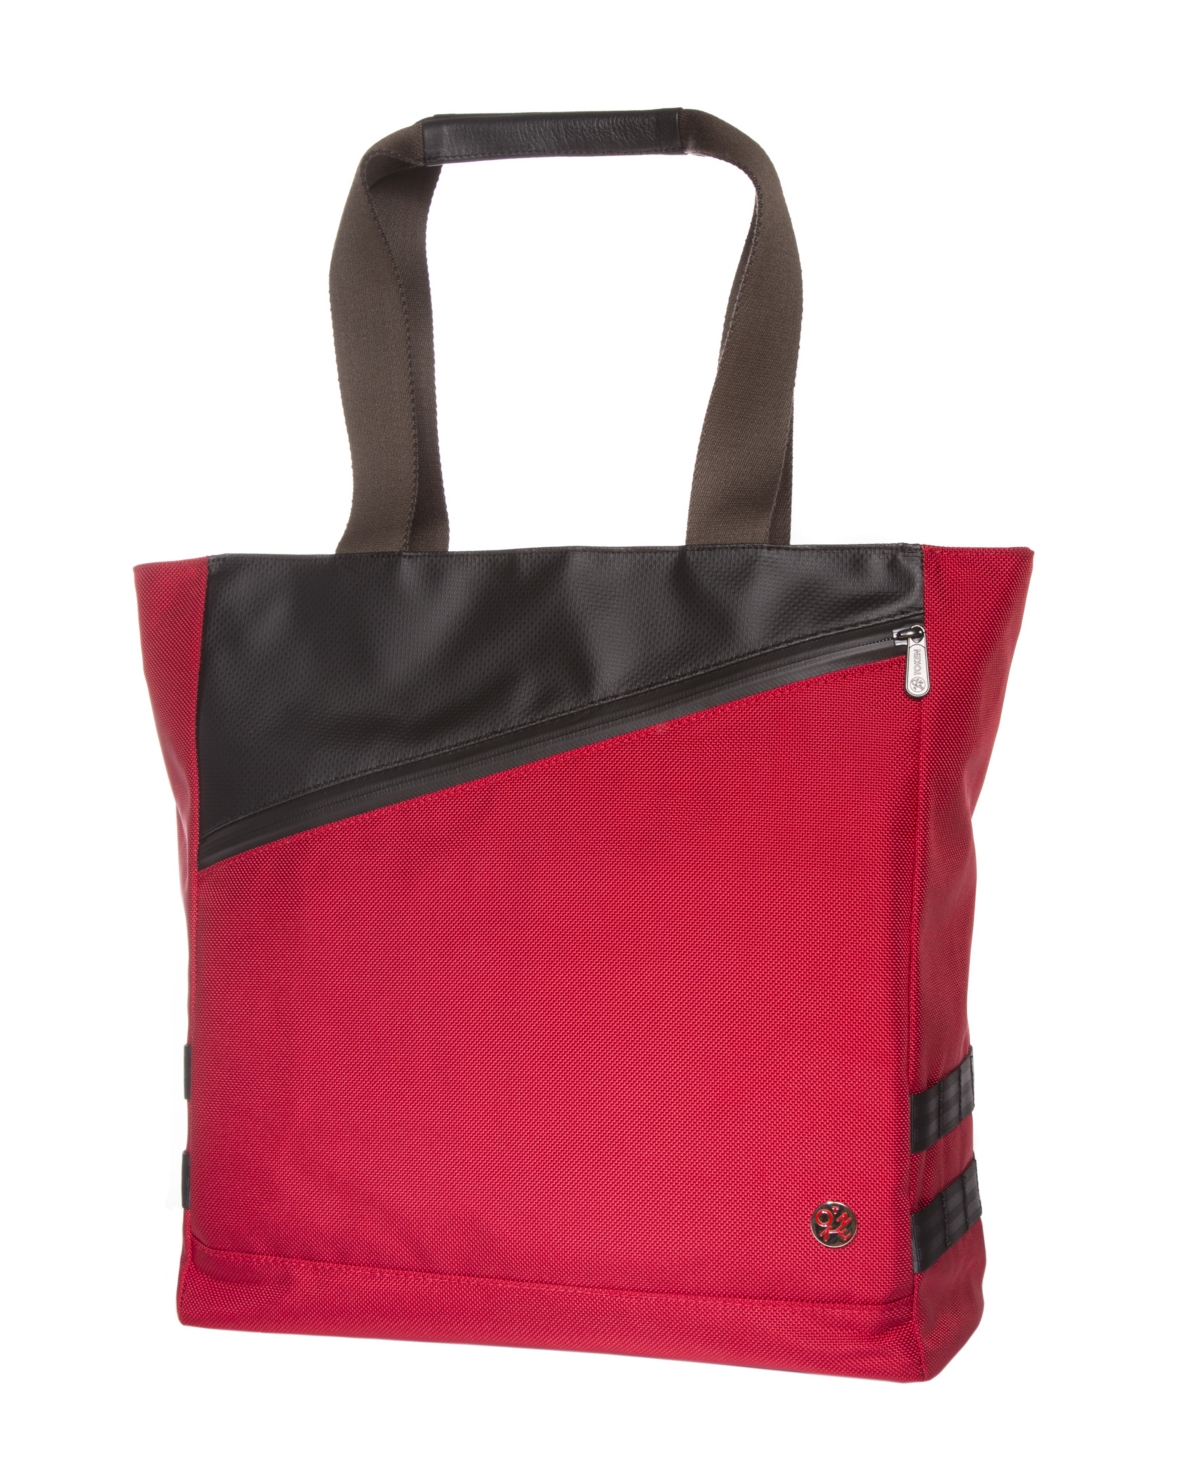 Grand Army Tote Bag - Red